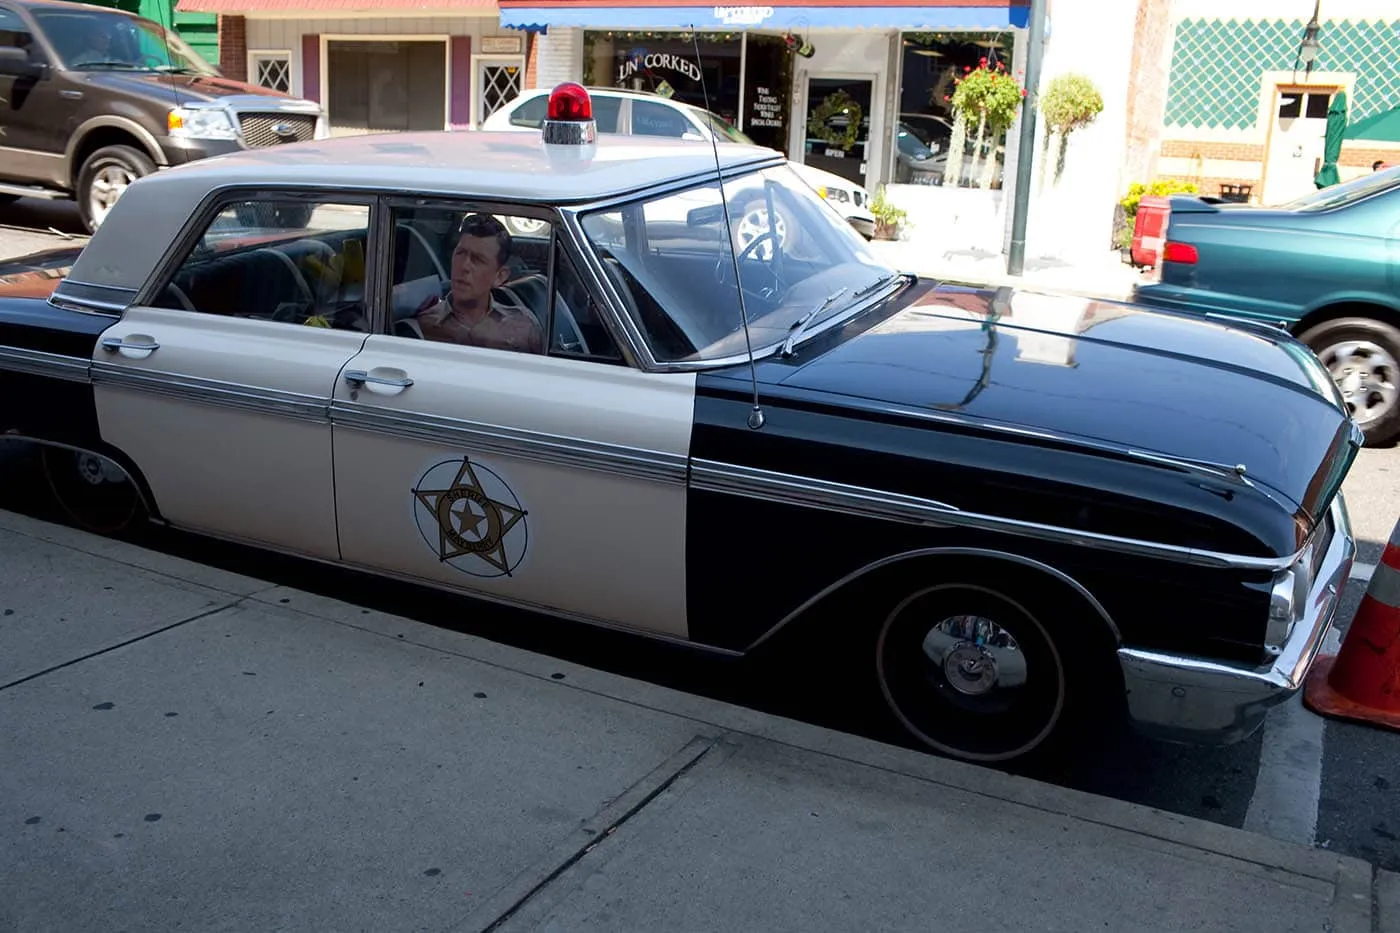 Sheriff's Car in Mount Airy, North Carolina - Home of Mayberry and Andy Griffith